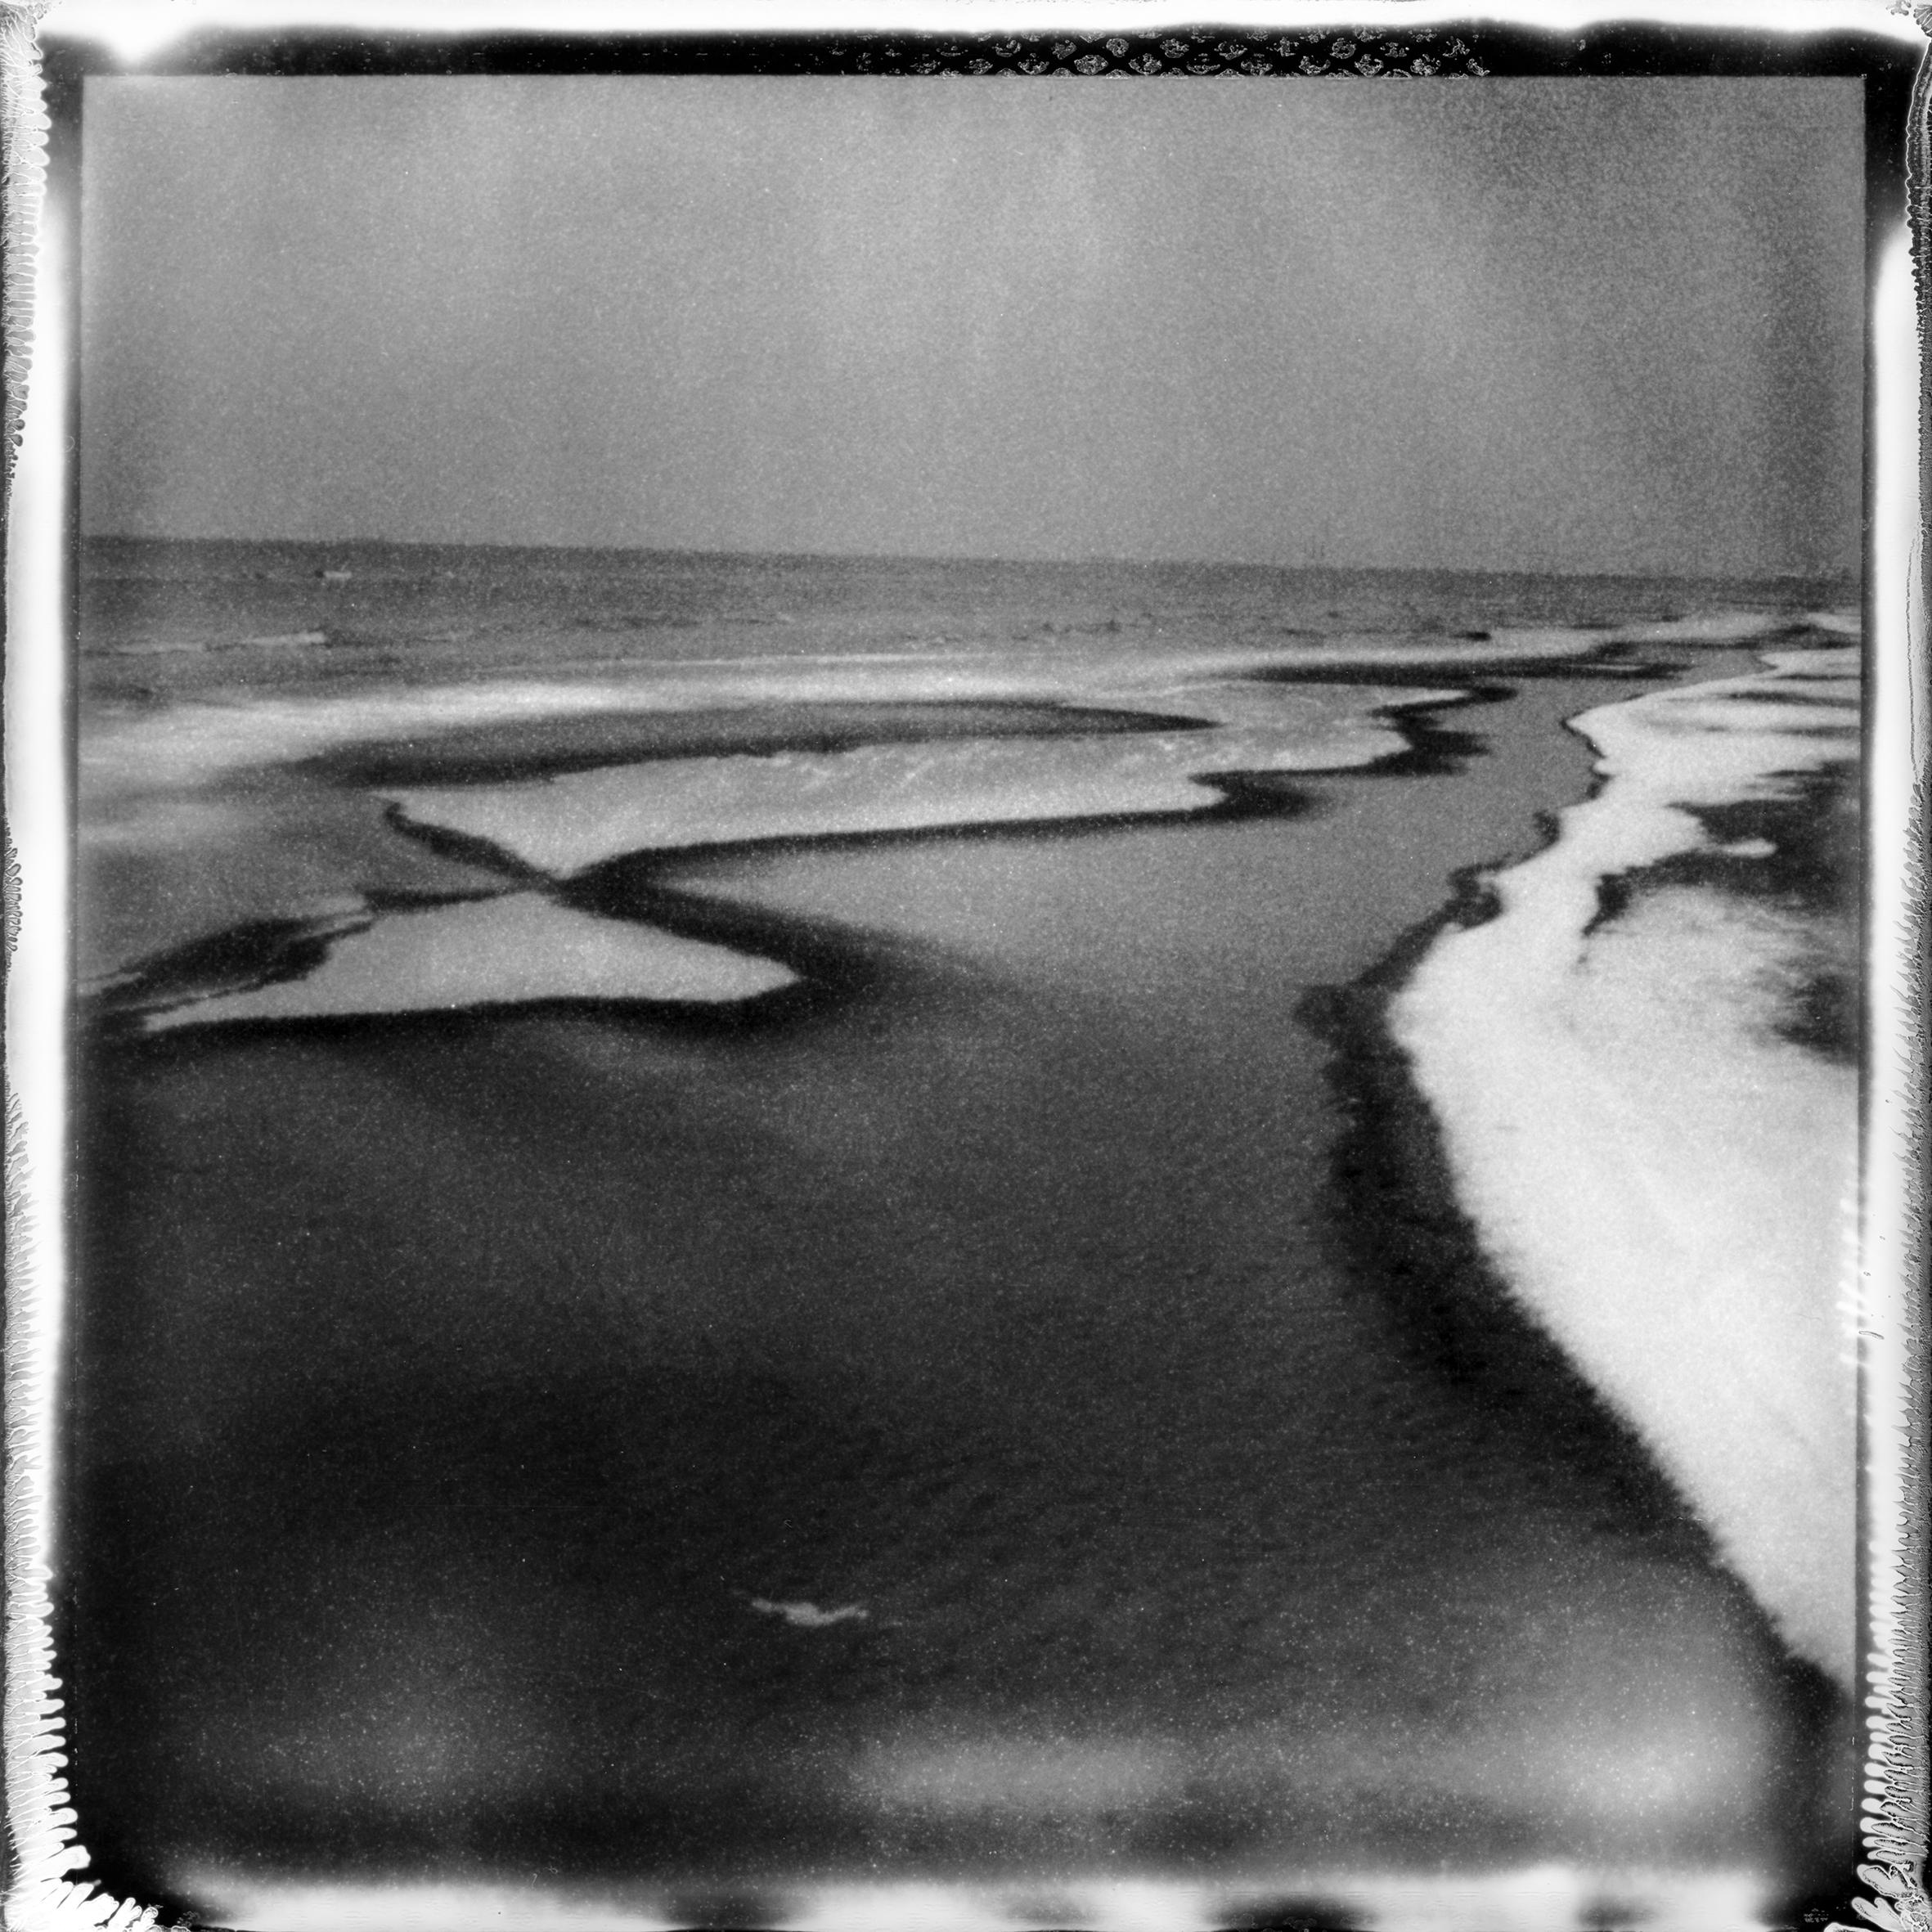 'Frozen beach #3' - black and white analogue landscape photography